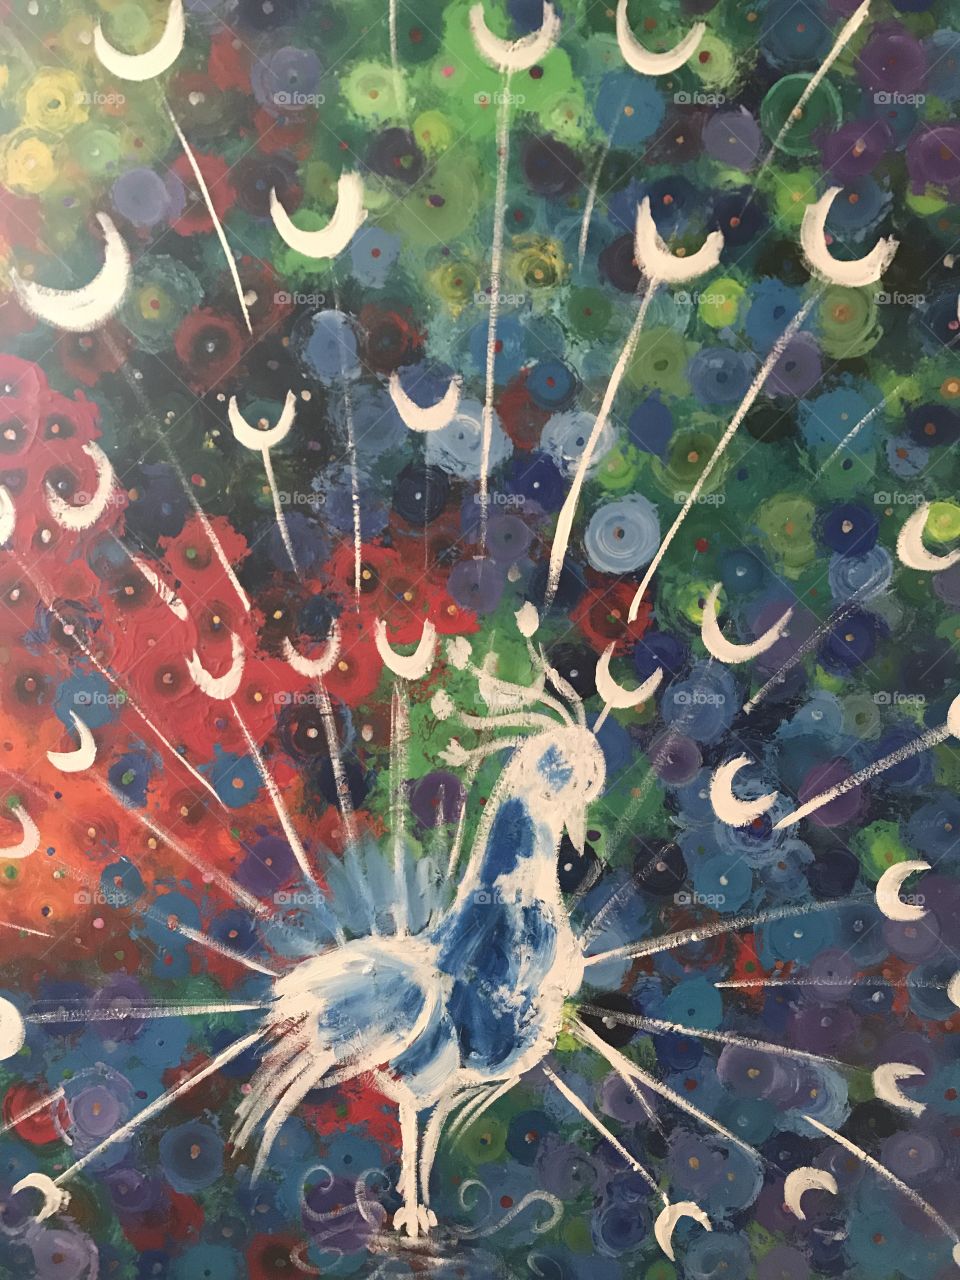 Peacock painting project part 1